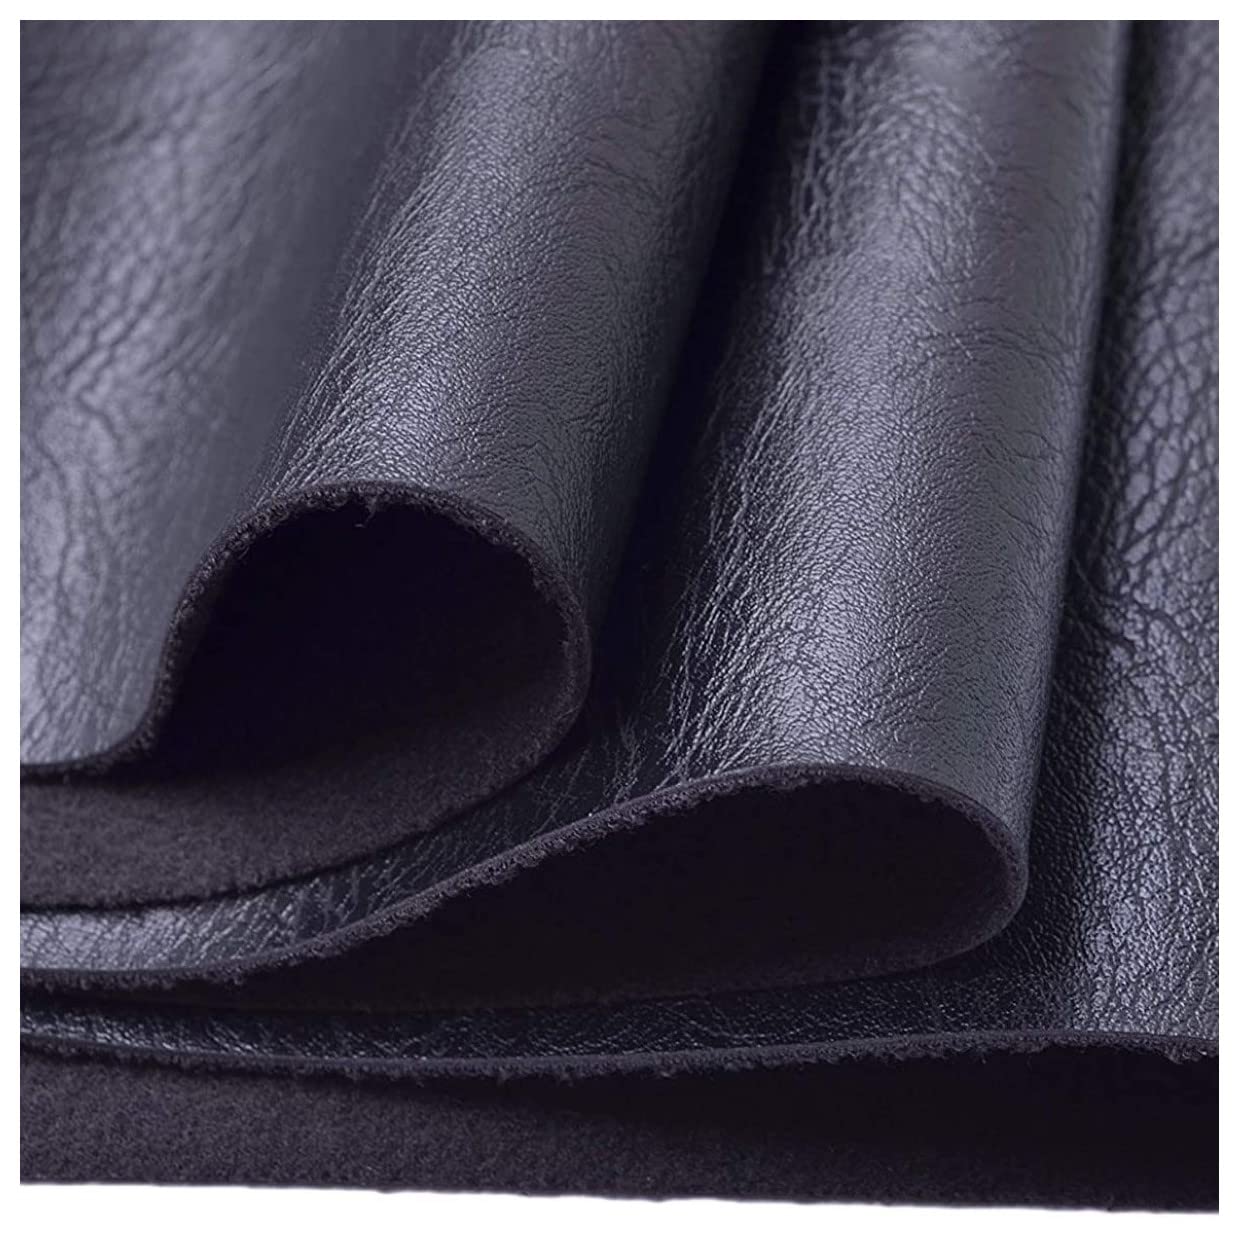 Bowzar Neon 1.2MM Thick Rexine Leatherette Artificial Leather for Sofa Black